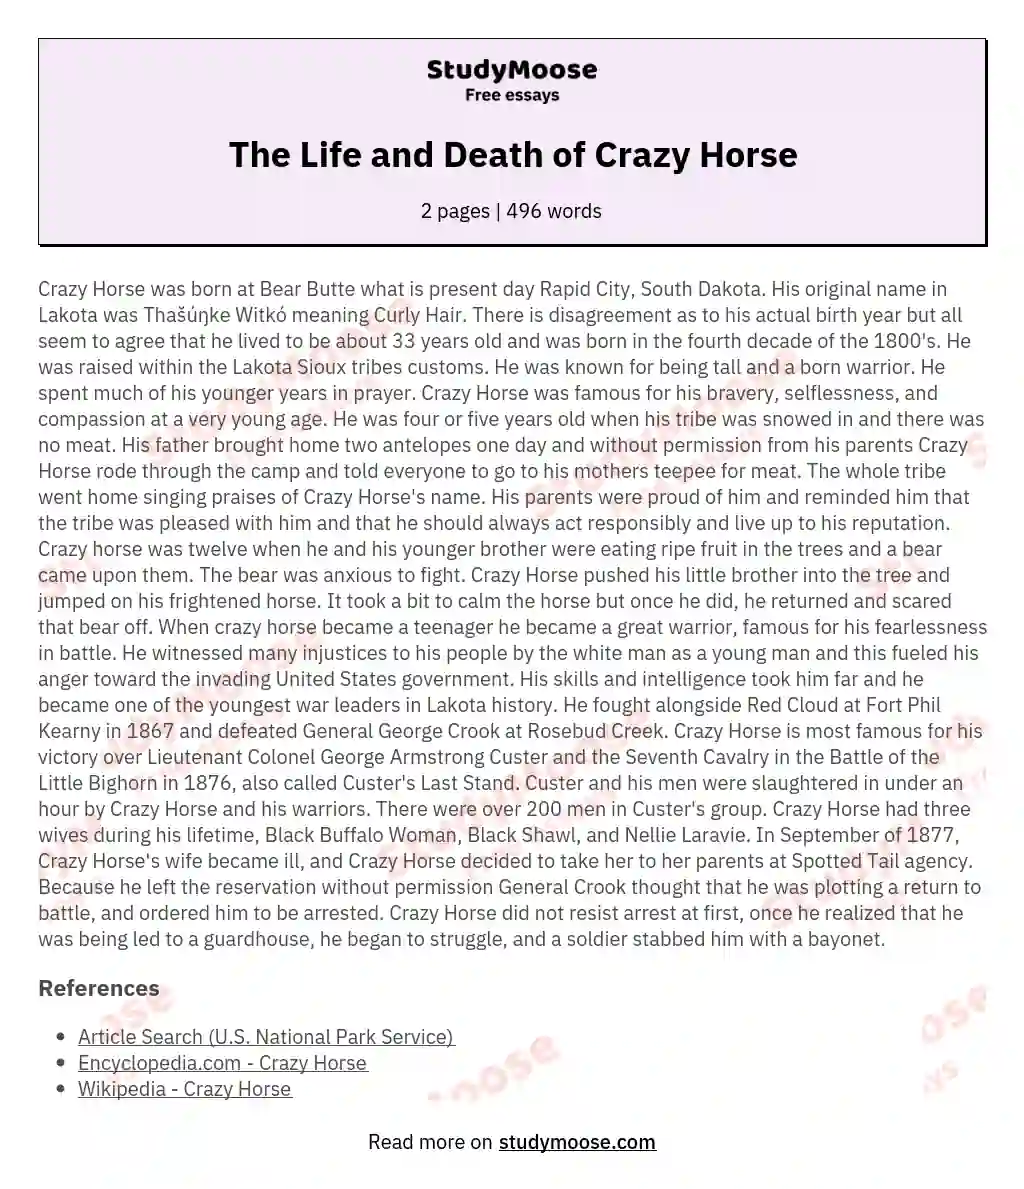 The Life and Death of Crazy Horse essay